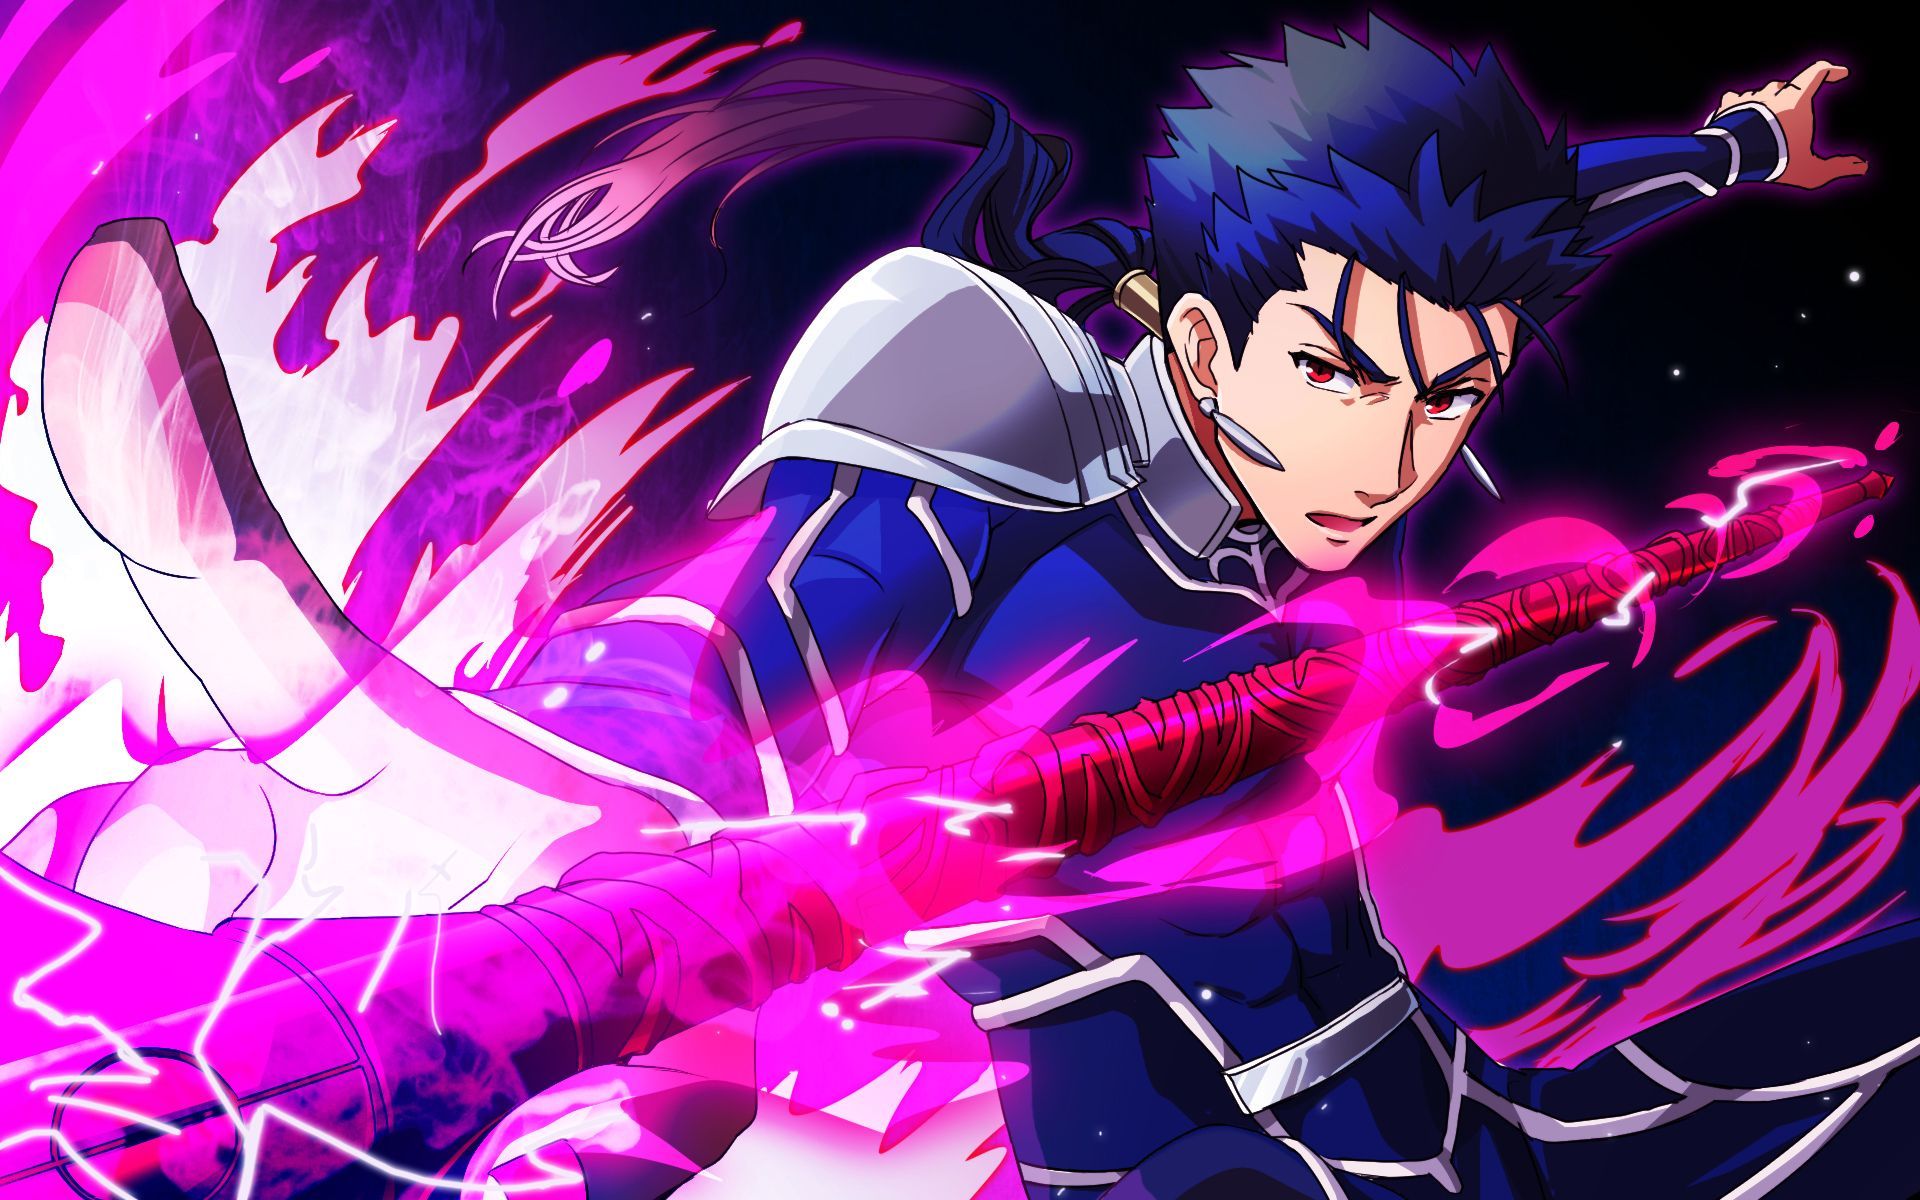 Anime Fate / Stay Night Anime Lancer (Fate / Stay Night) Lance Red Eyes xanh tóc Wallpaper. Fate stay night, Fate stay night anime, Anime